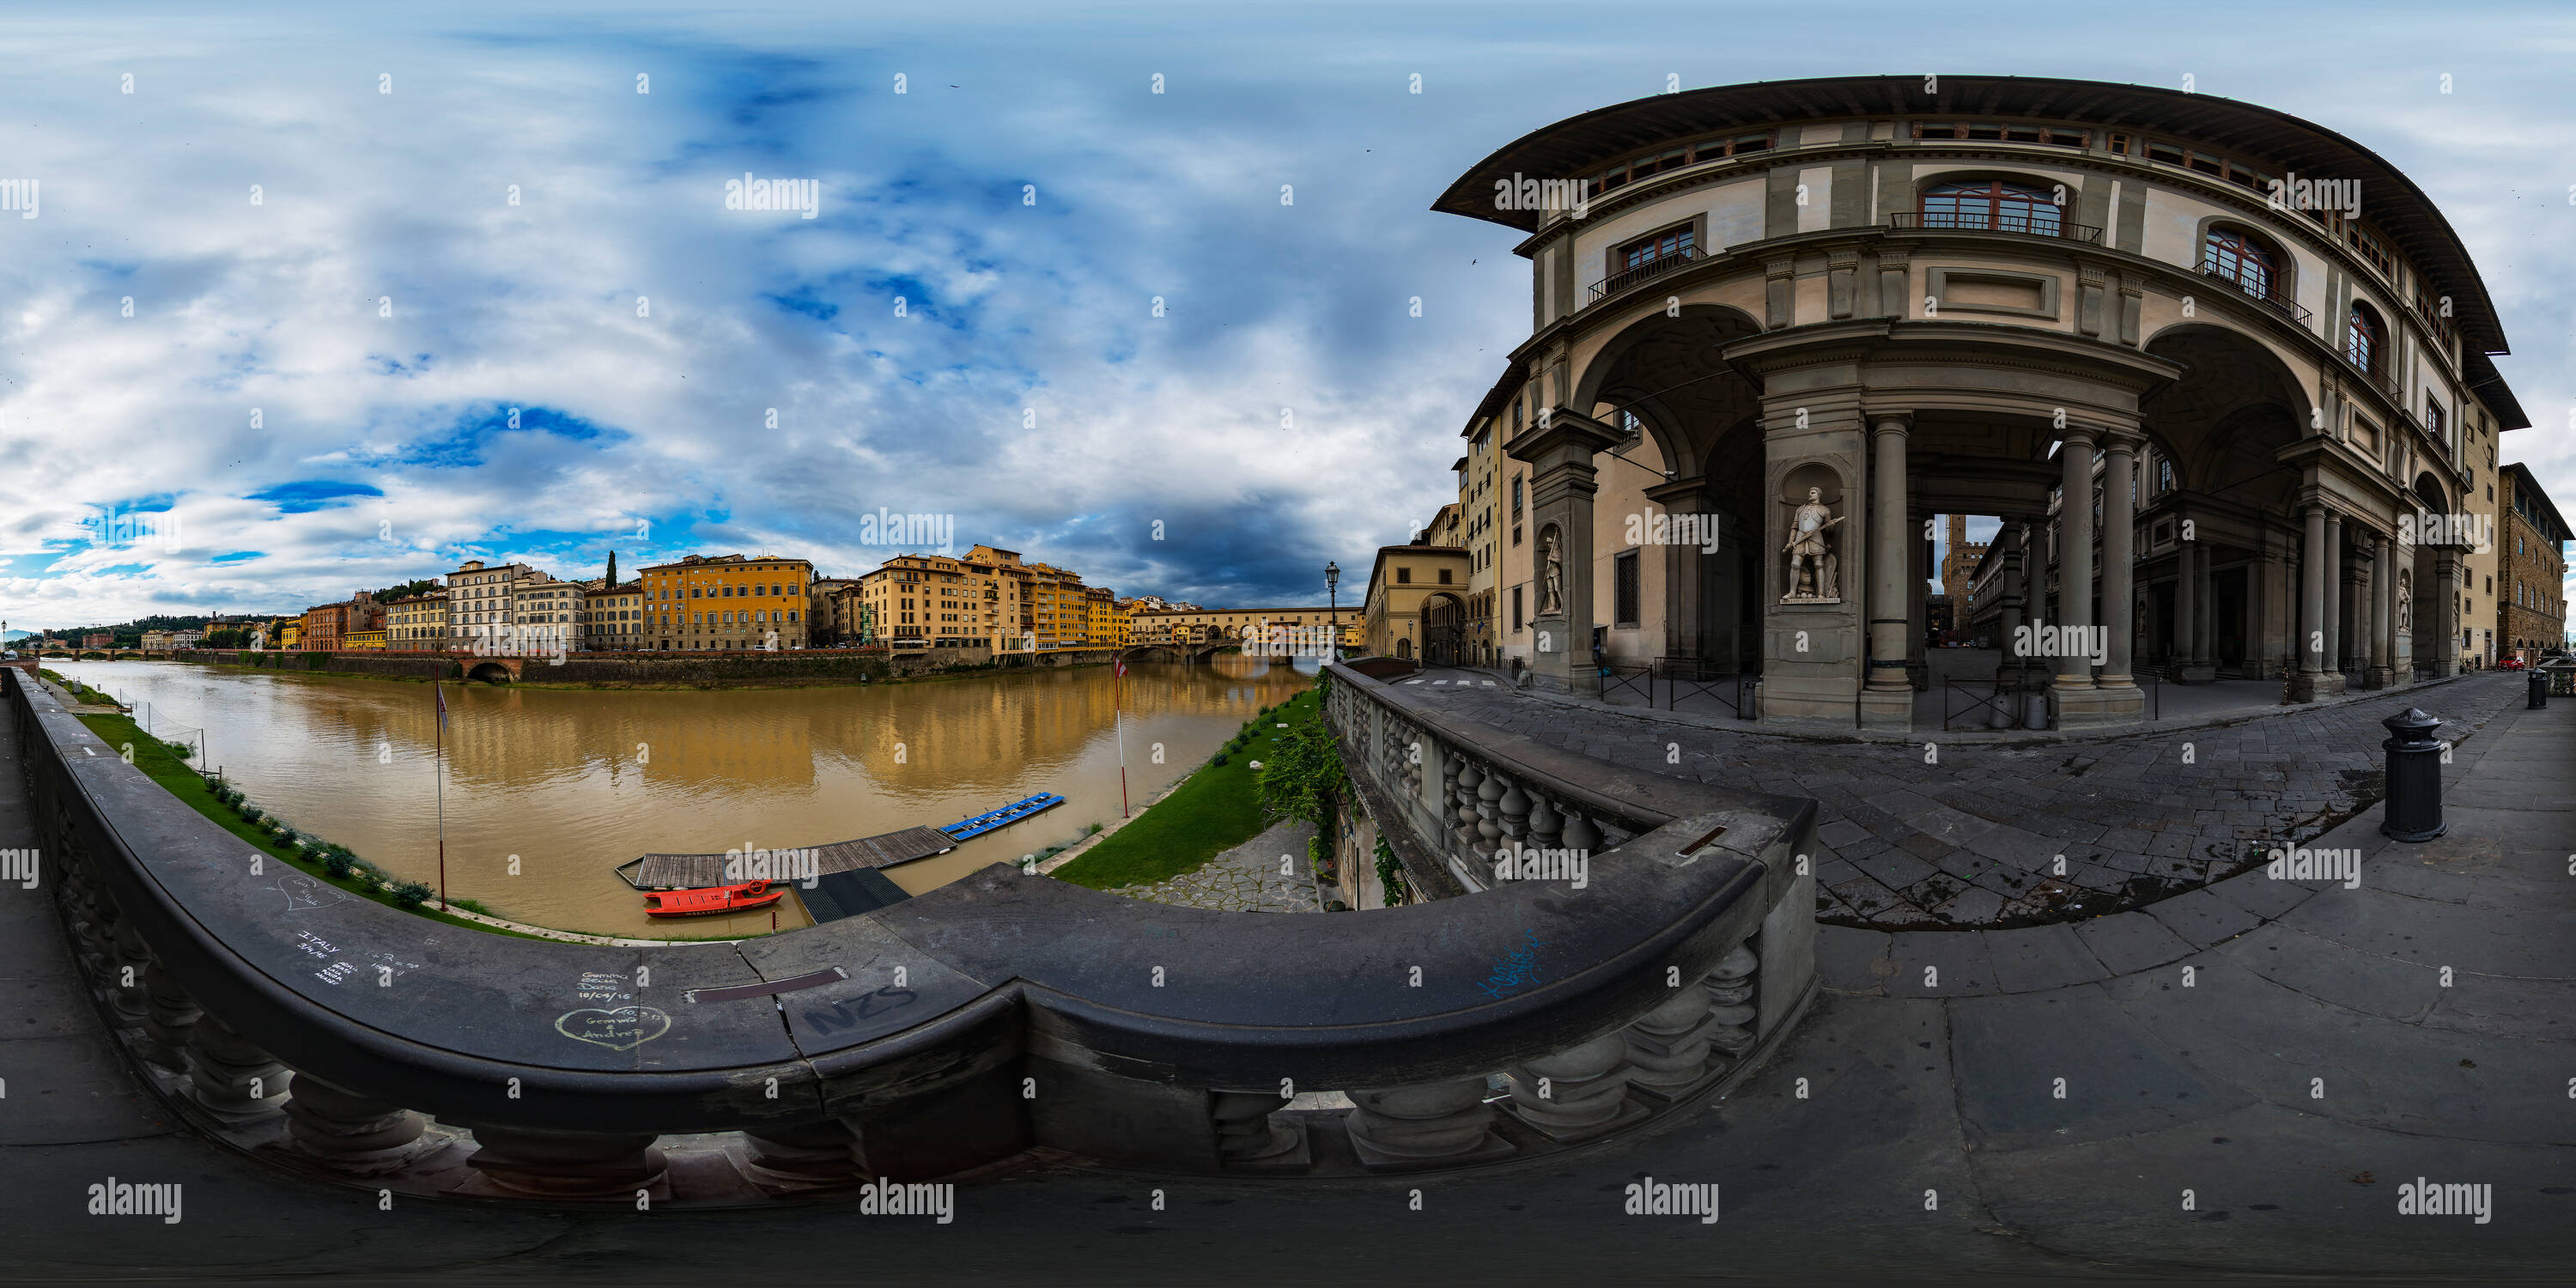 360 degree panoramic view of Florence - View to the Ponte Vecchio from the River Arno near the Uffizi Gallery